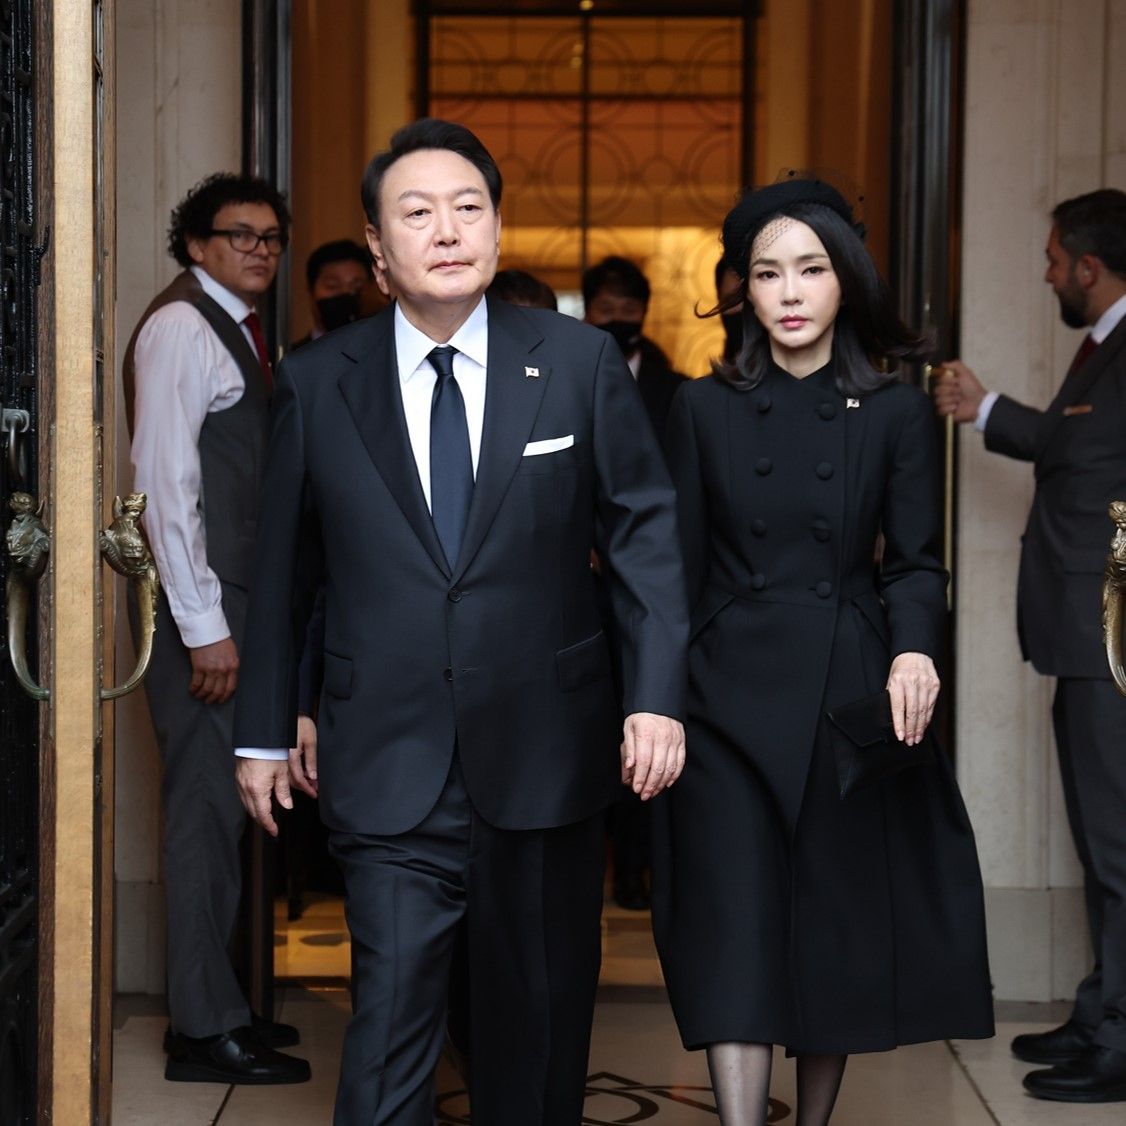 President Yoon Suk-yeol and first lady Kim Keon-hee leave a London hotel on Monday to attend the state funeral for Queen Elizabeth II. (Yonhap)